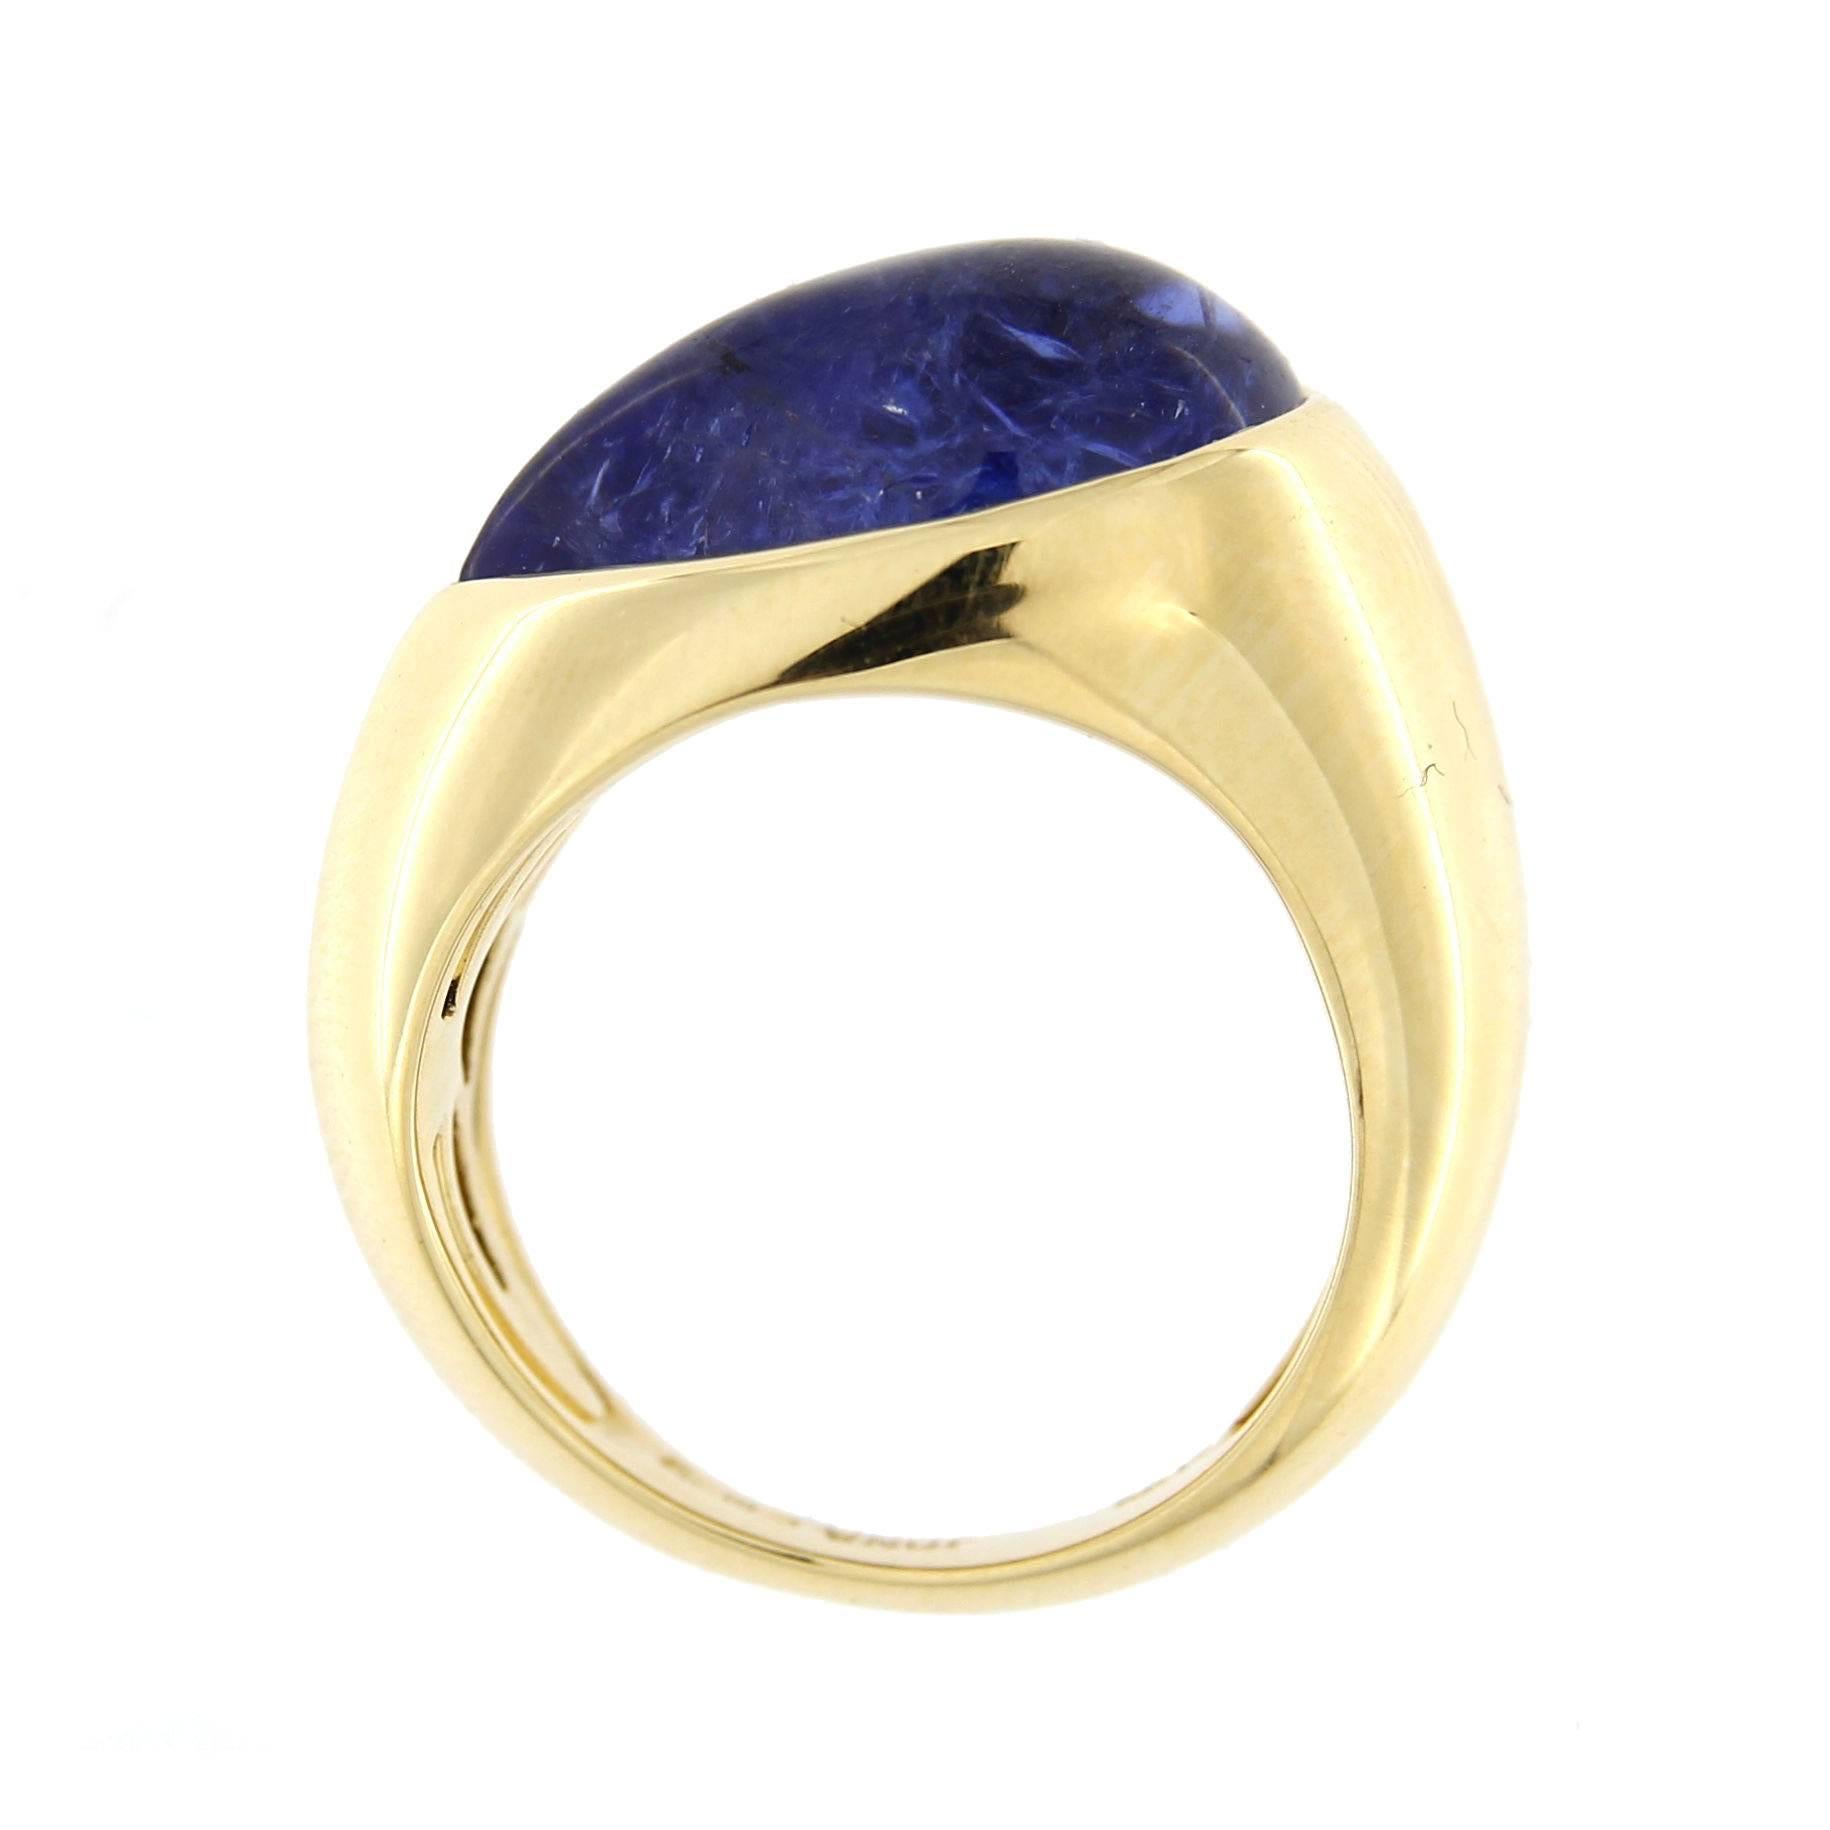 Jona design collection, hand crafted in Italy, 18 Karat yellow gold ring centering a 8.4 carat cabochon drop Tanzanite. Ring Size US 6.

All Jona jewelry is new and has never been previously owned or worn. Each item will arrive at your door